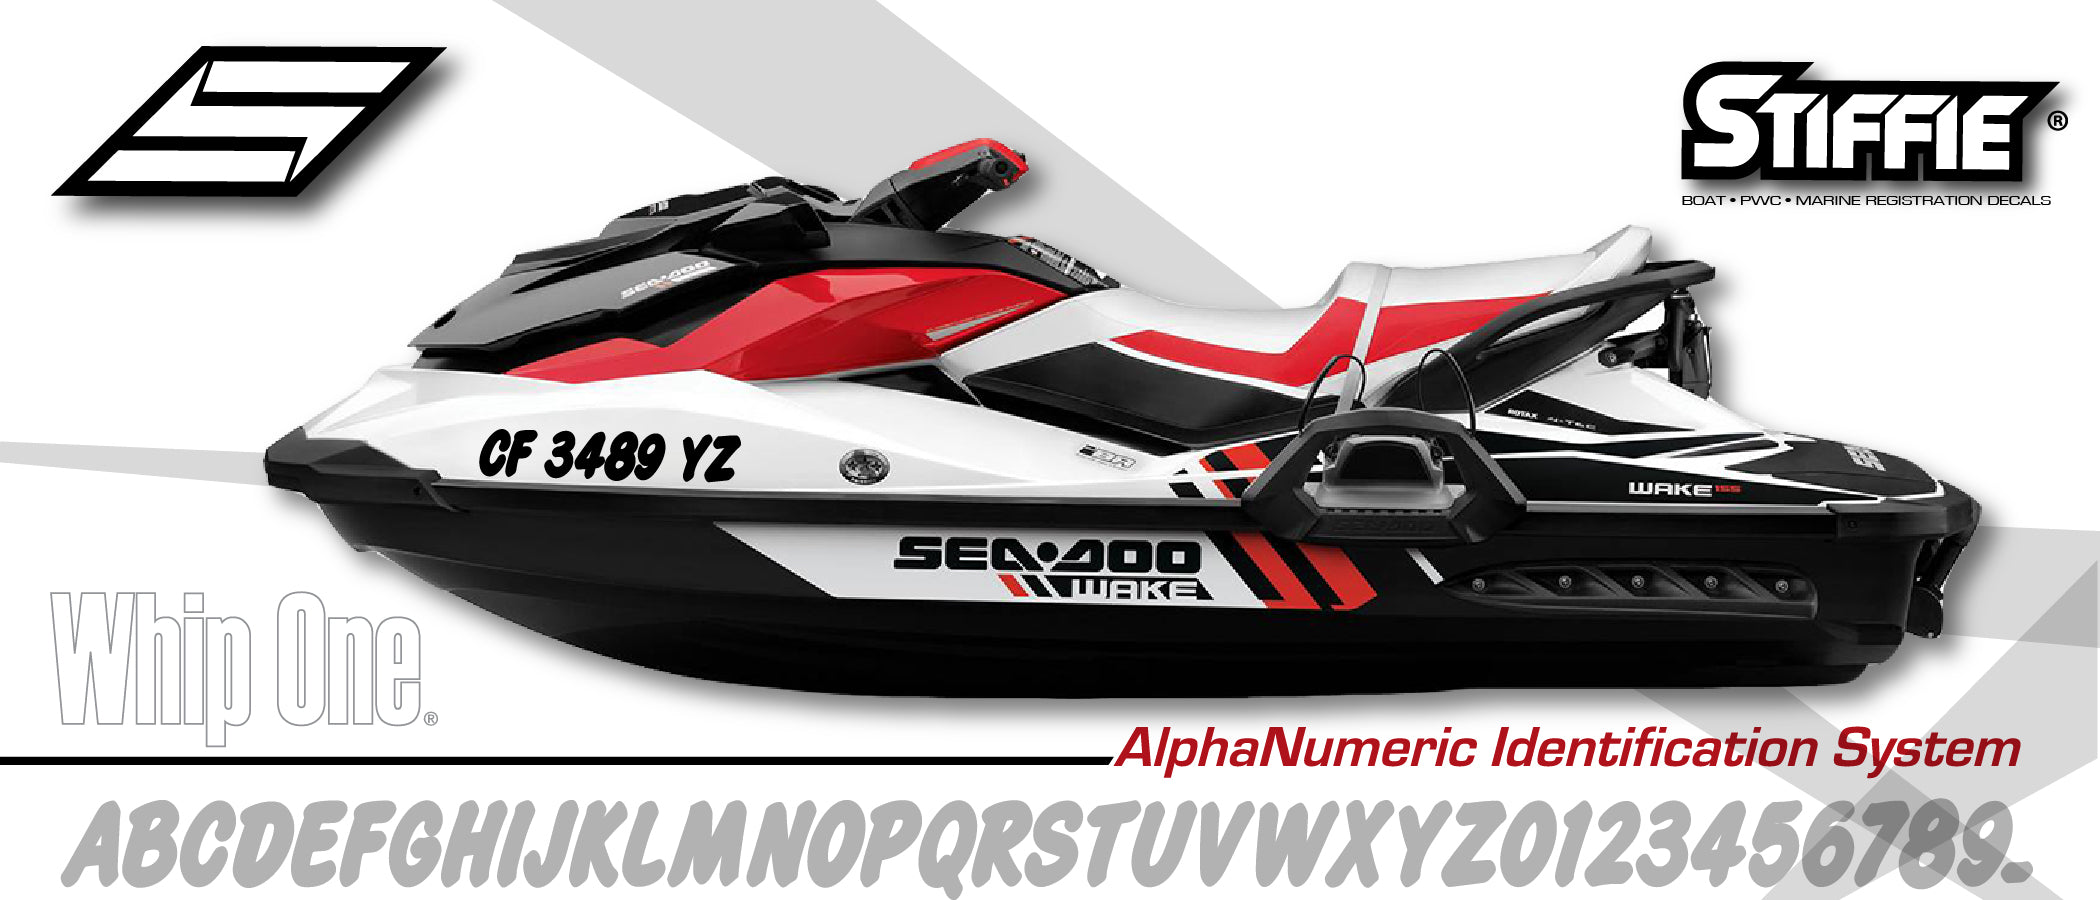 Stiffie Whip-One Red Super Sticky 3" Alpha Numeric Registration Identification Numbers Stickers Decals for Sea-Doo Spark, Inflatable Boats, Ribs, Hypalon/PVC, PWC and Boats